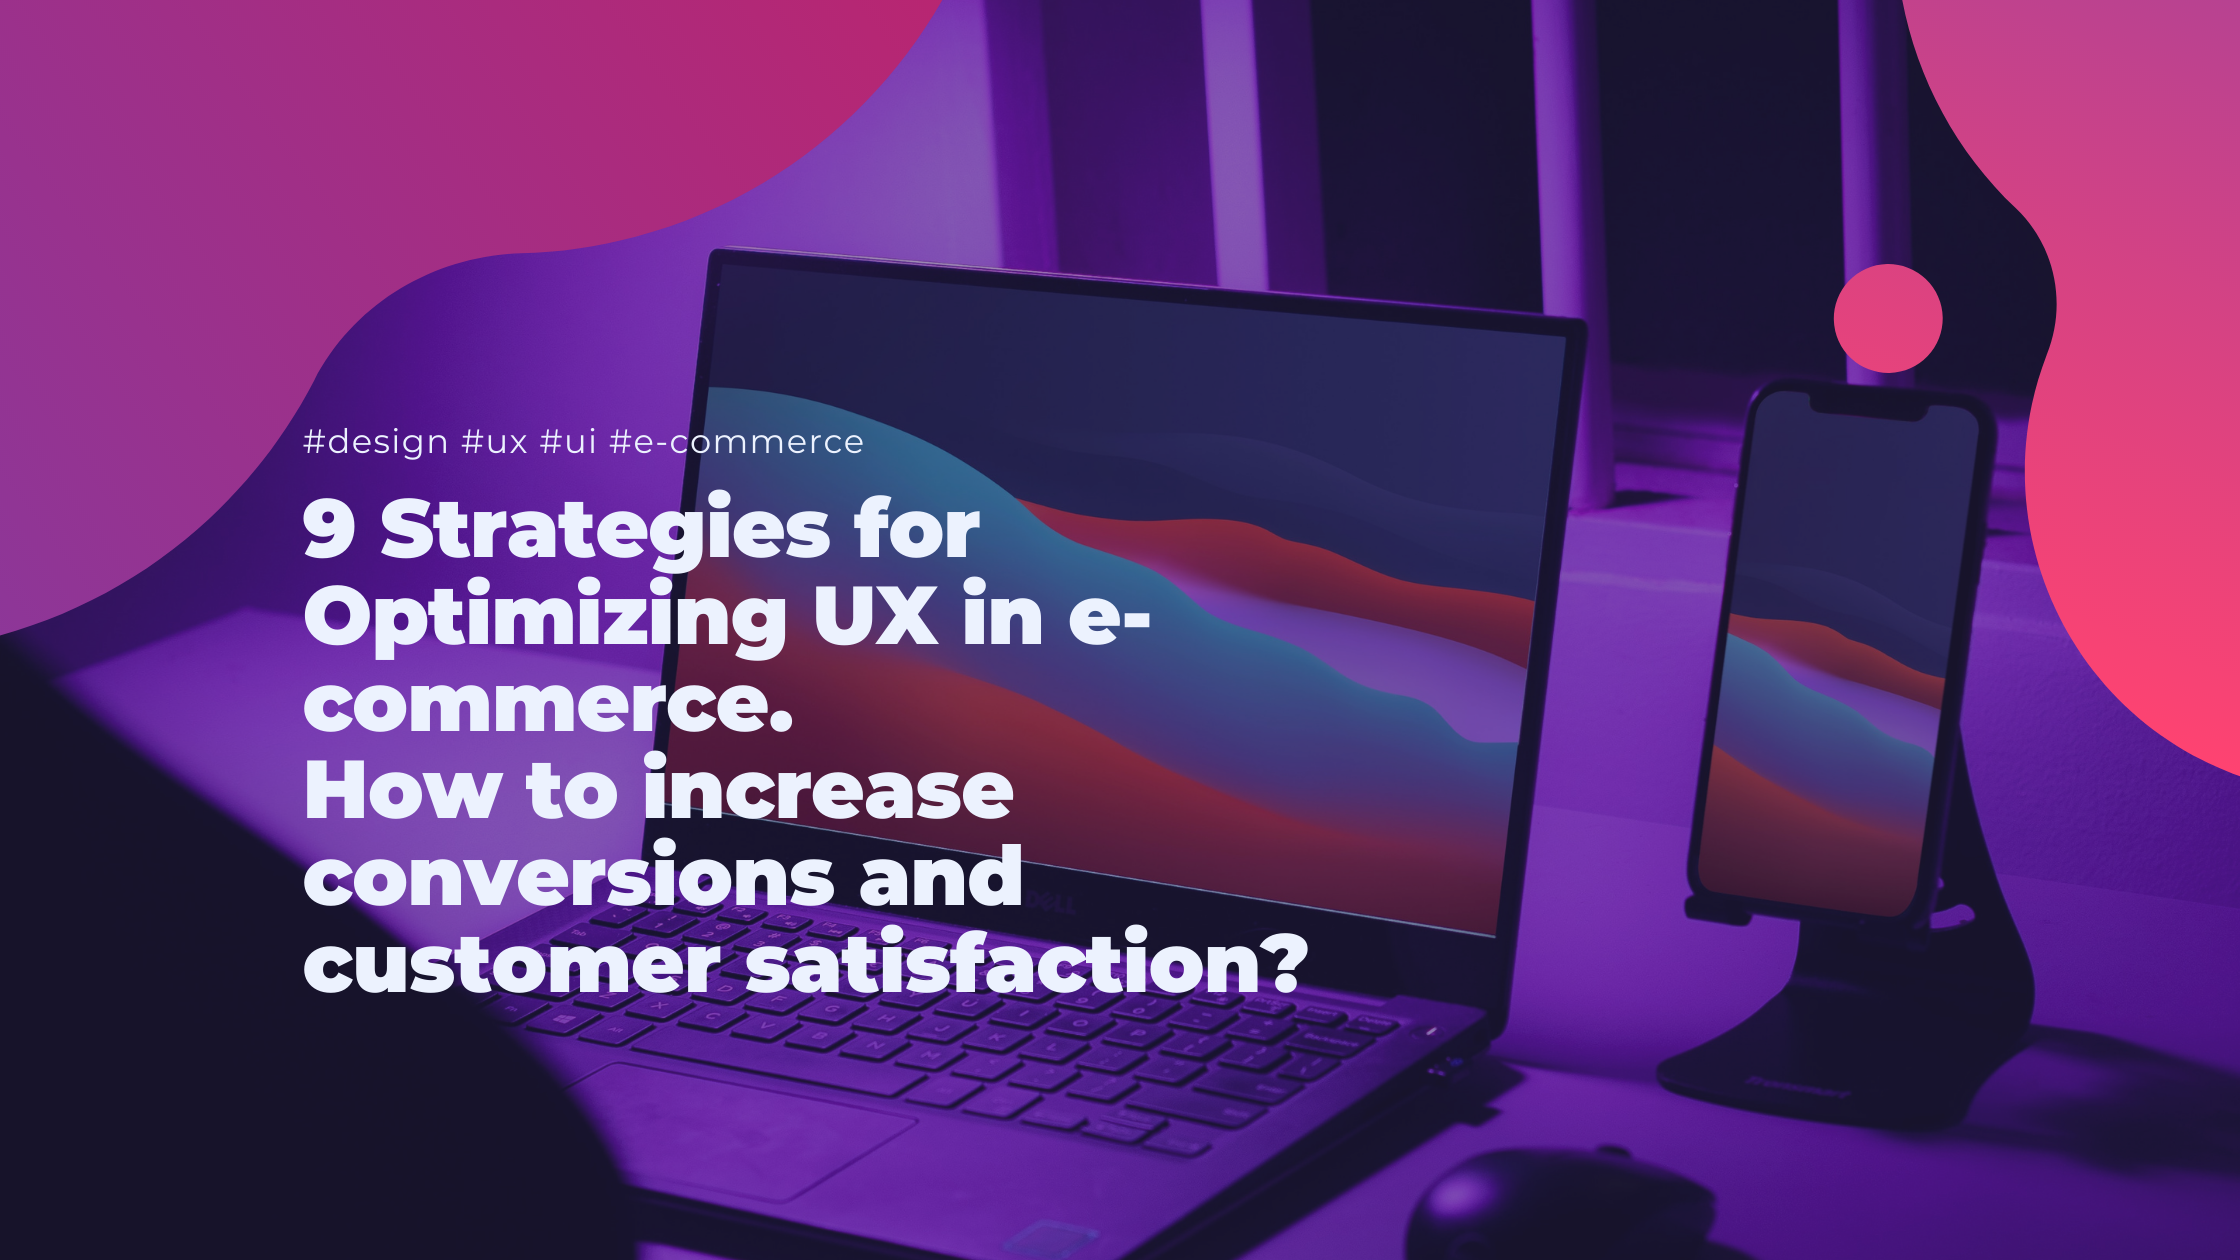 9 Strategies for UX Optimization in E-commerce: How to Increase Conversions and Customer Satisfaction